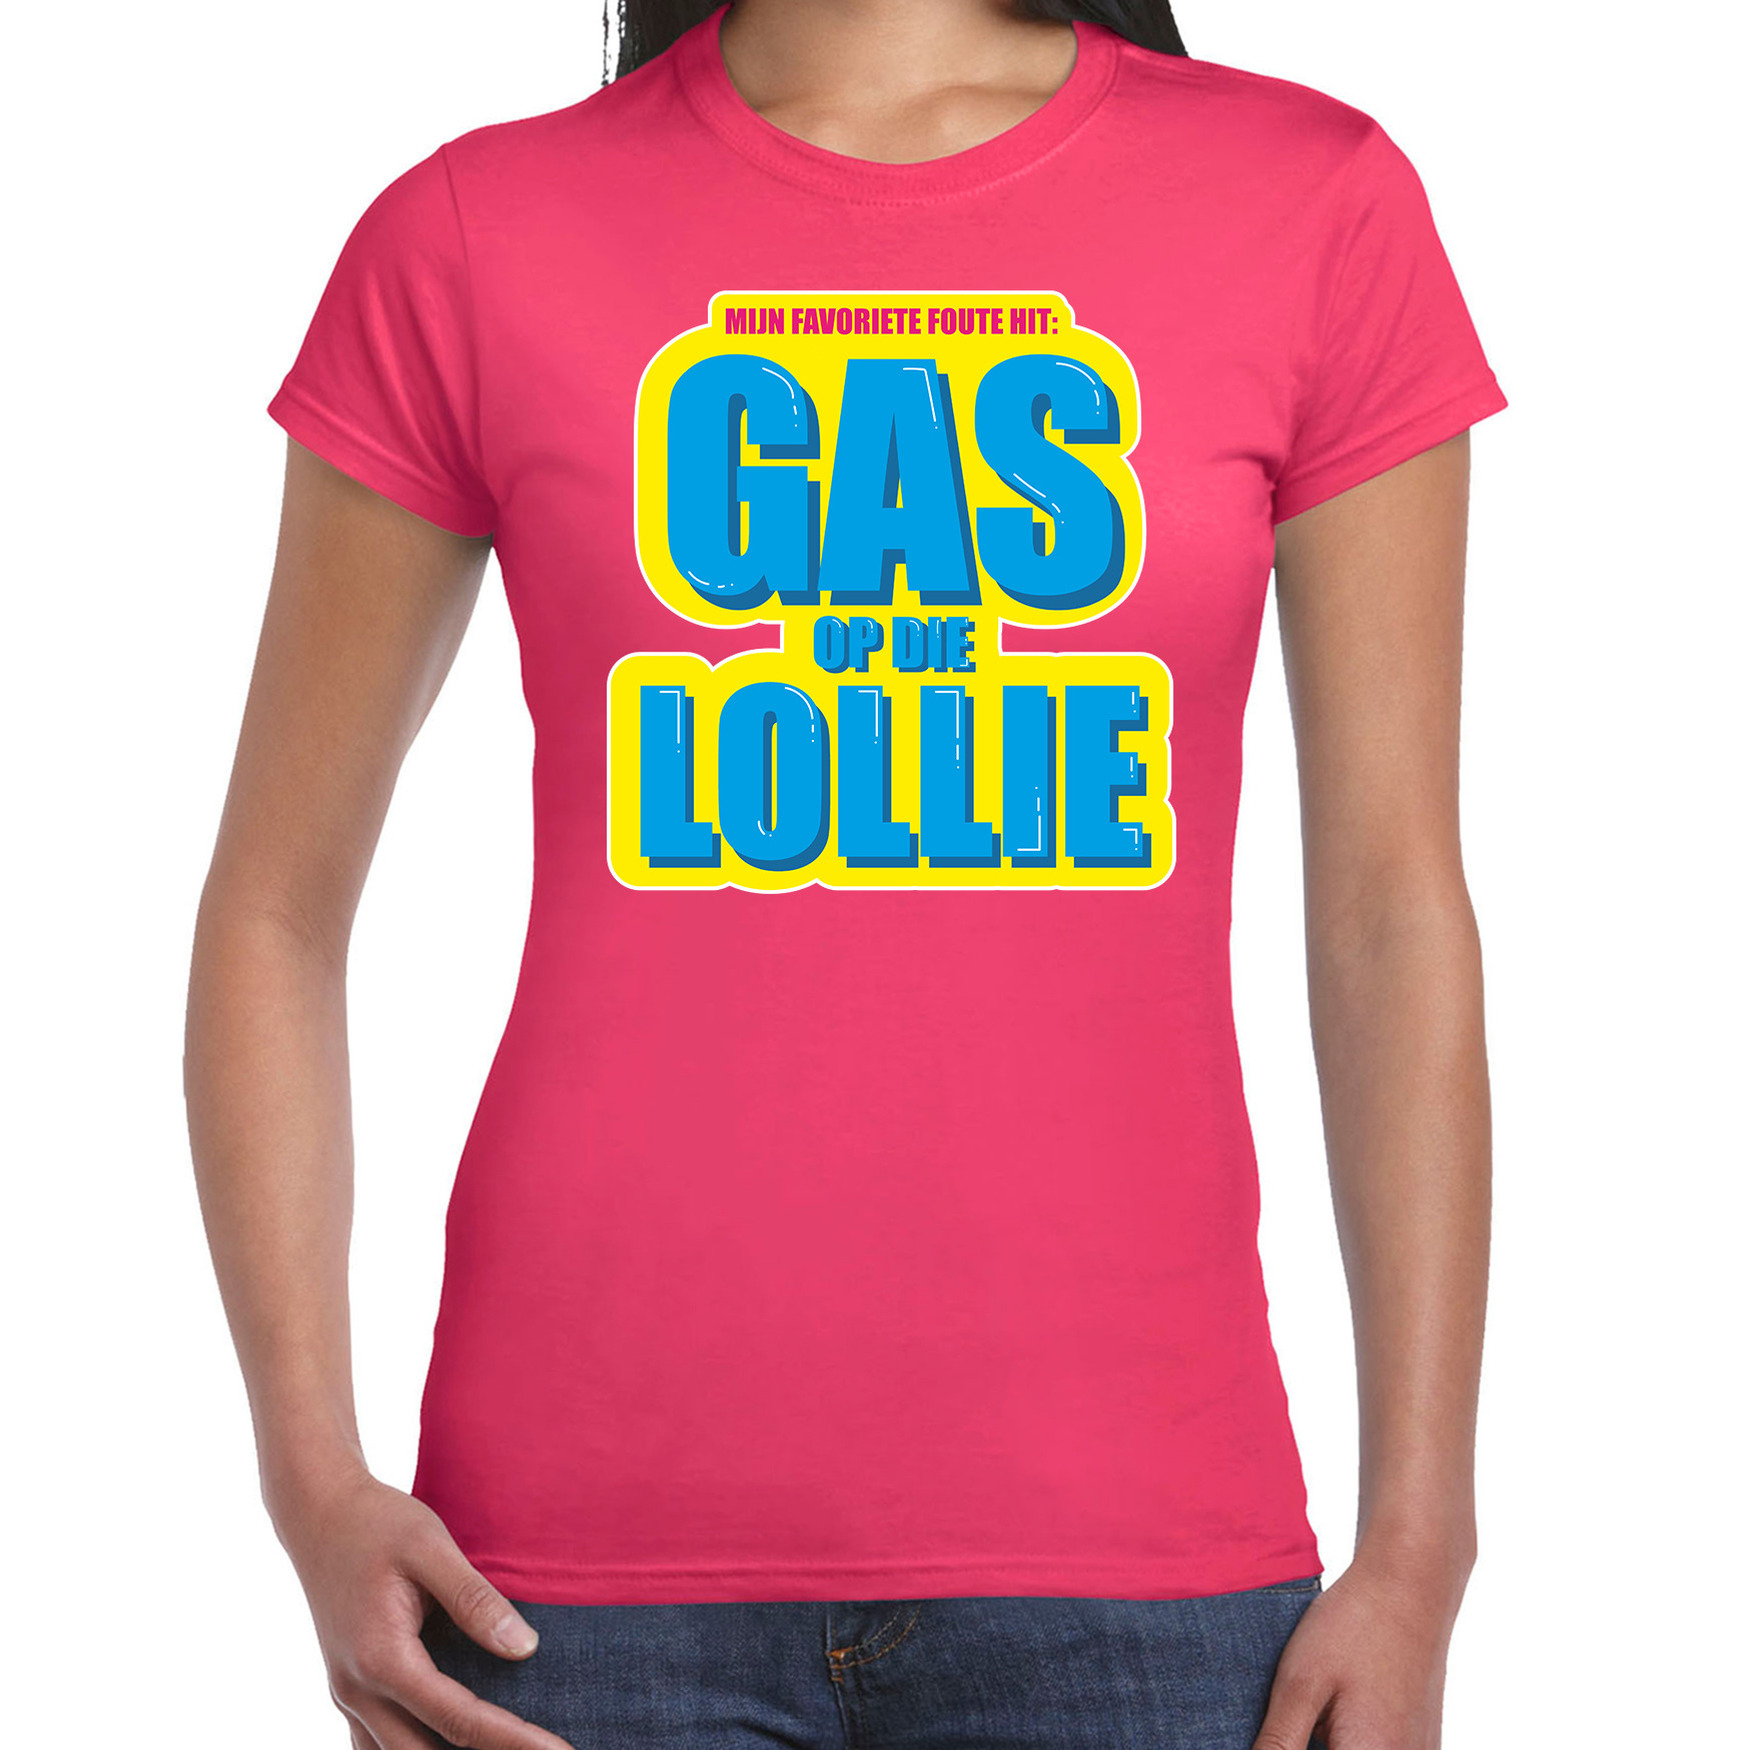 Foute party Gas op die Lollie verkleed t-shirt roze dames Foute party hits outfit- kleding